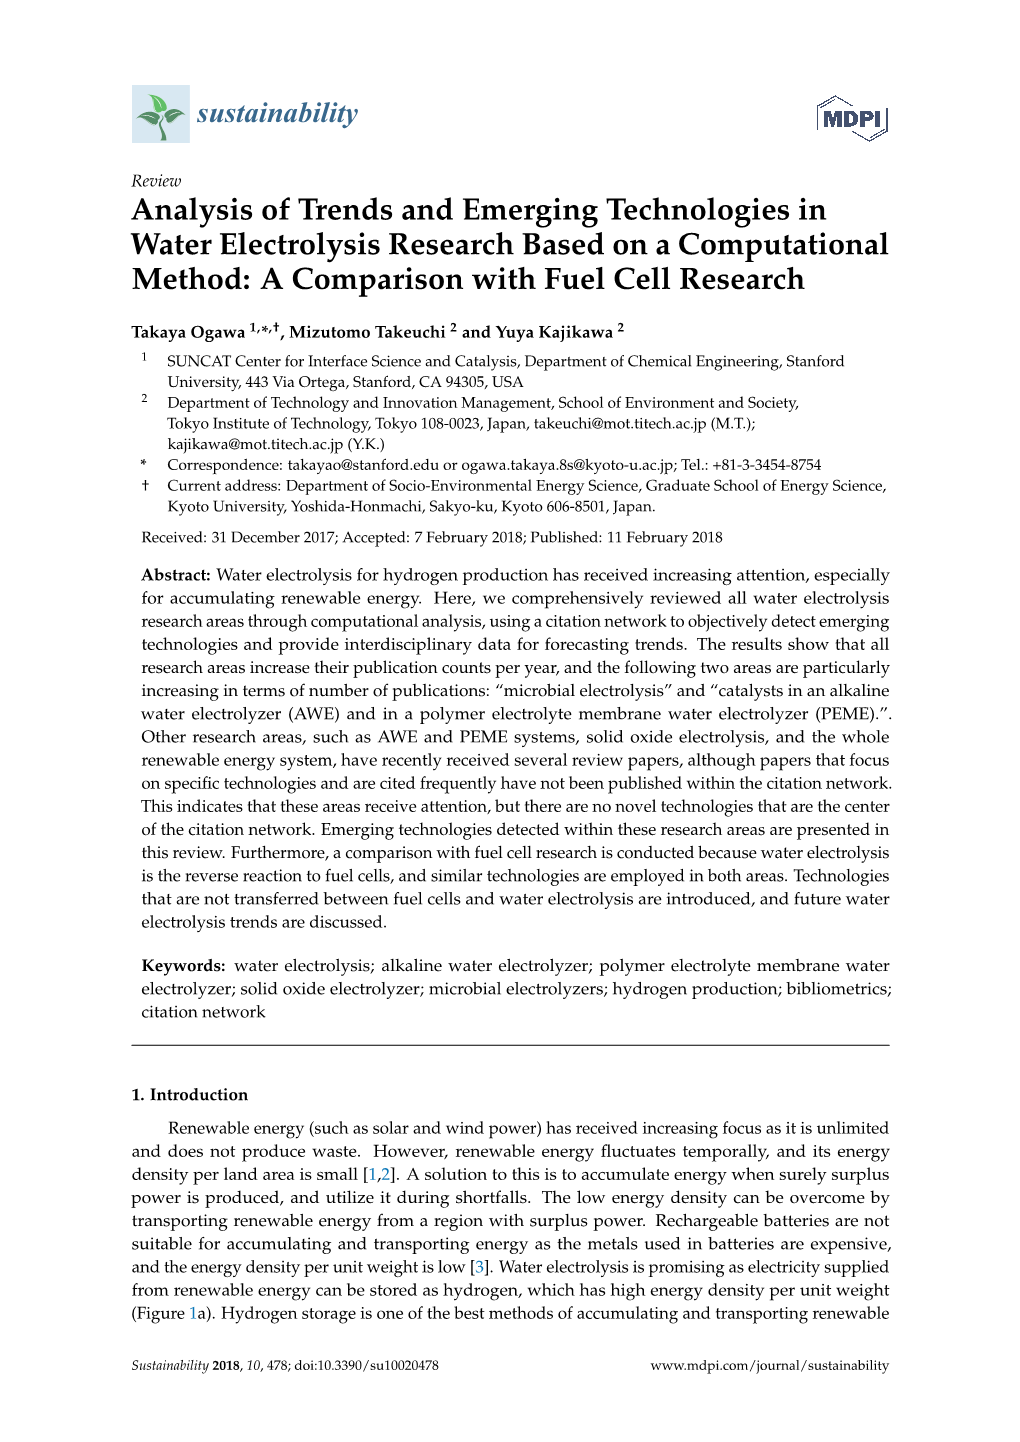 Analysis of Trends and Emerging Technologies in Water Electrolysis Research Based on a Computational Method: a Comparison with Fuel Cell Research